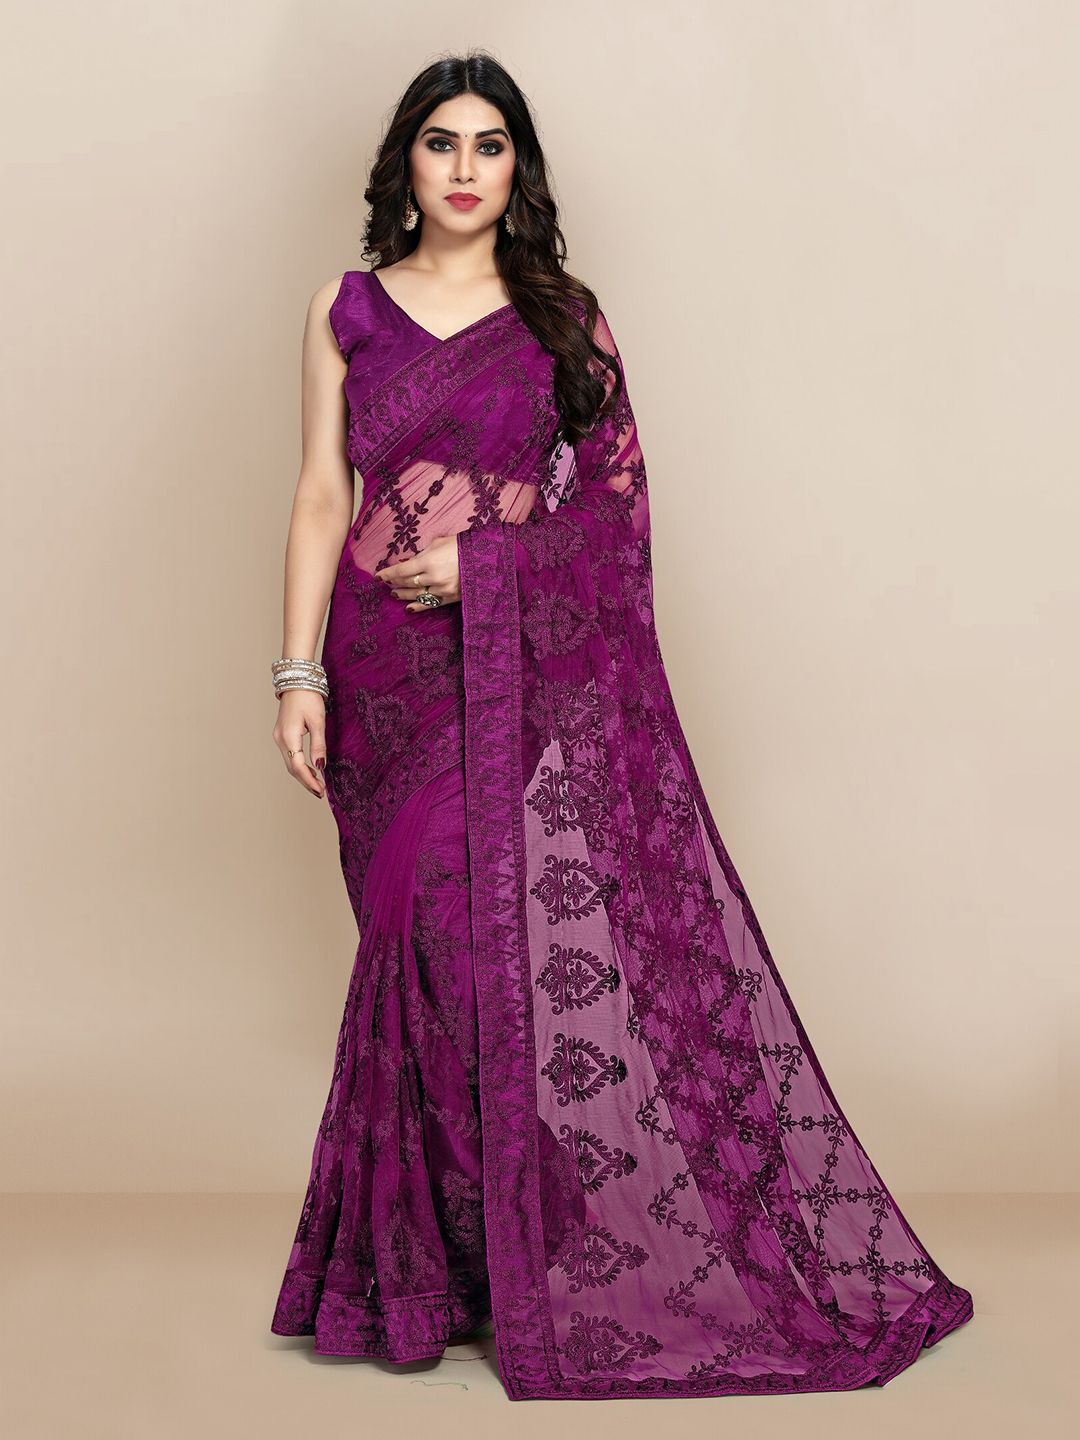 VAIRAGEE Purple Floral Embroidered Net Saree Price in India